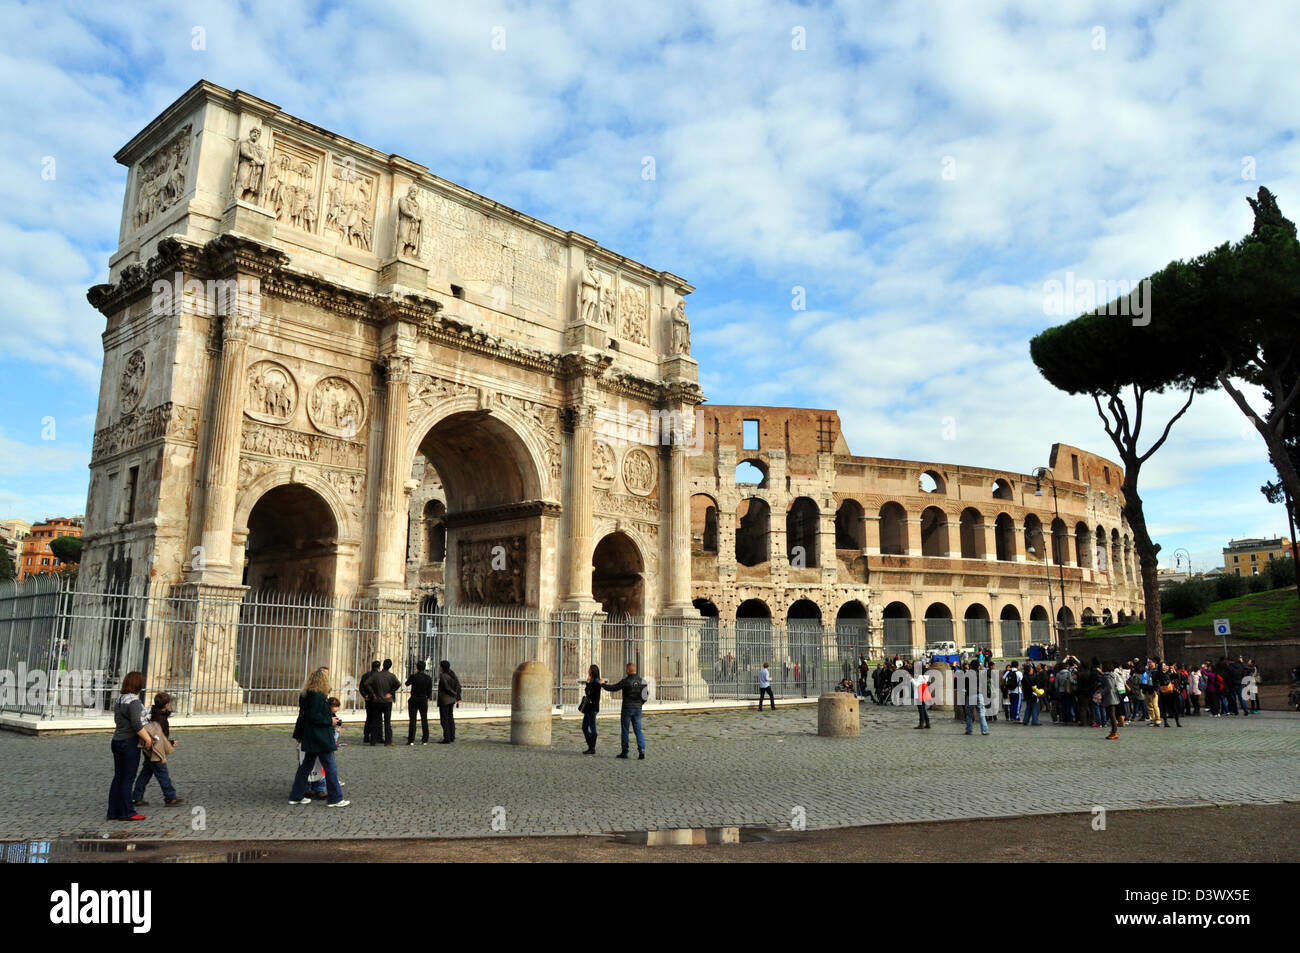 Roman Forum in front of the Colosseum, Rome Italy Stock Photo